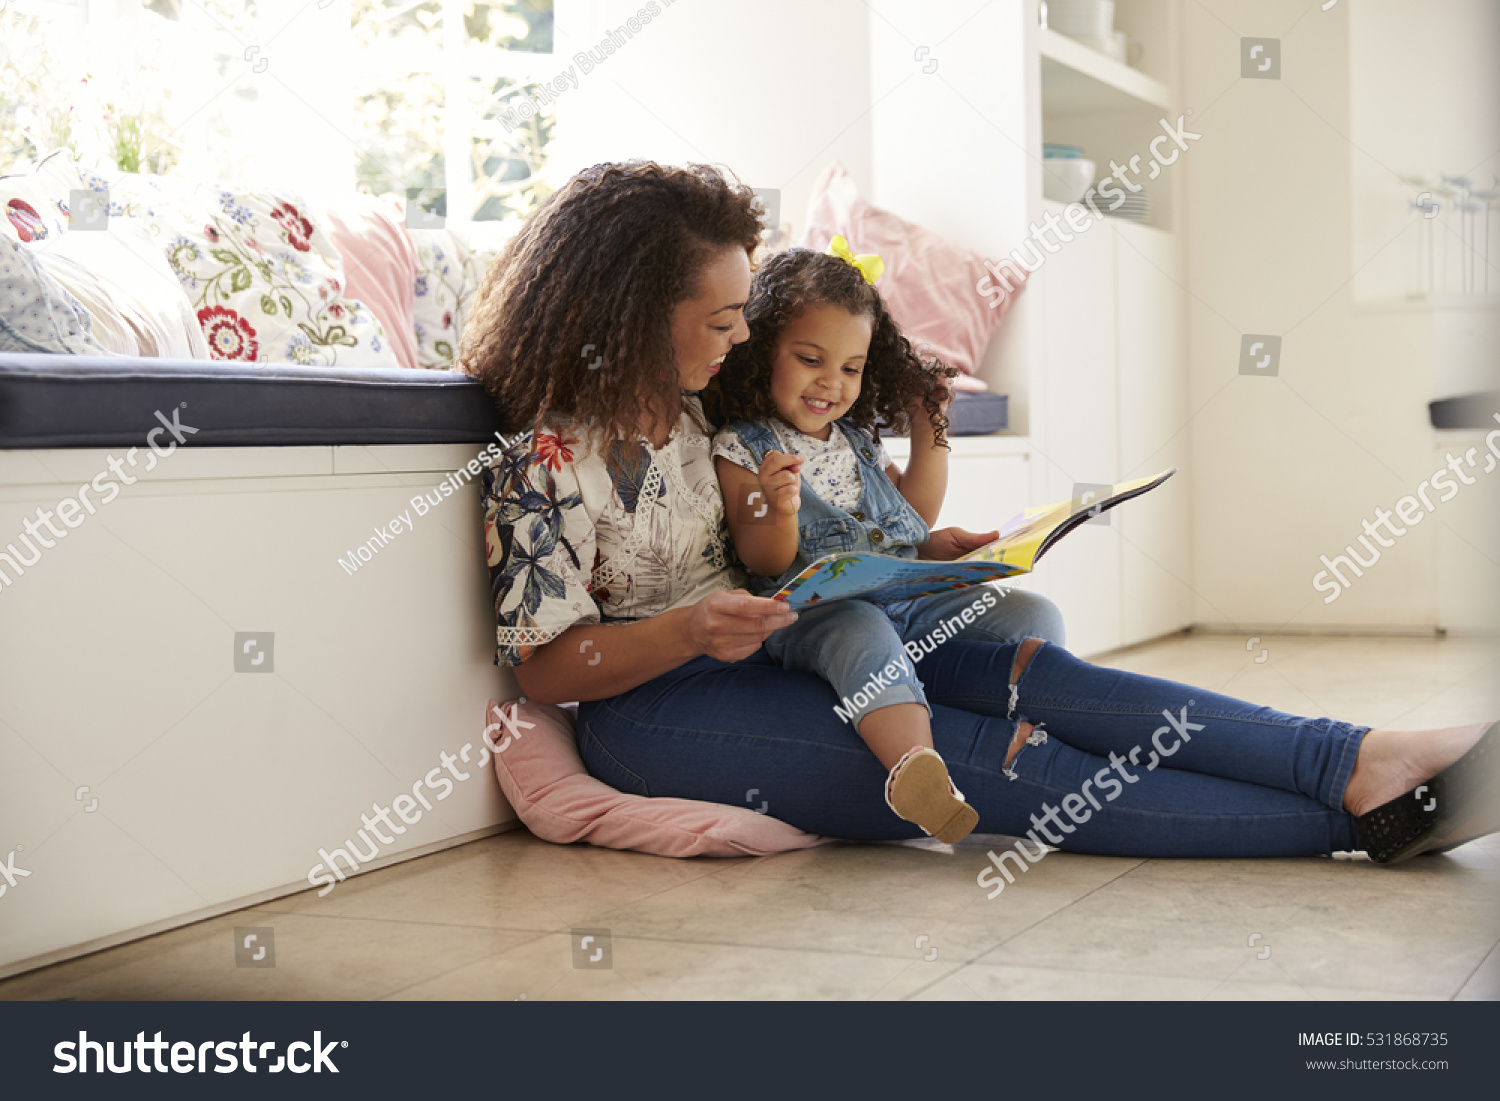 Mother sitting on the floor reading a book with her daughter #531868735